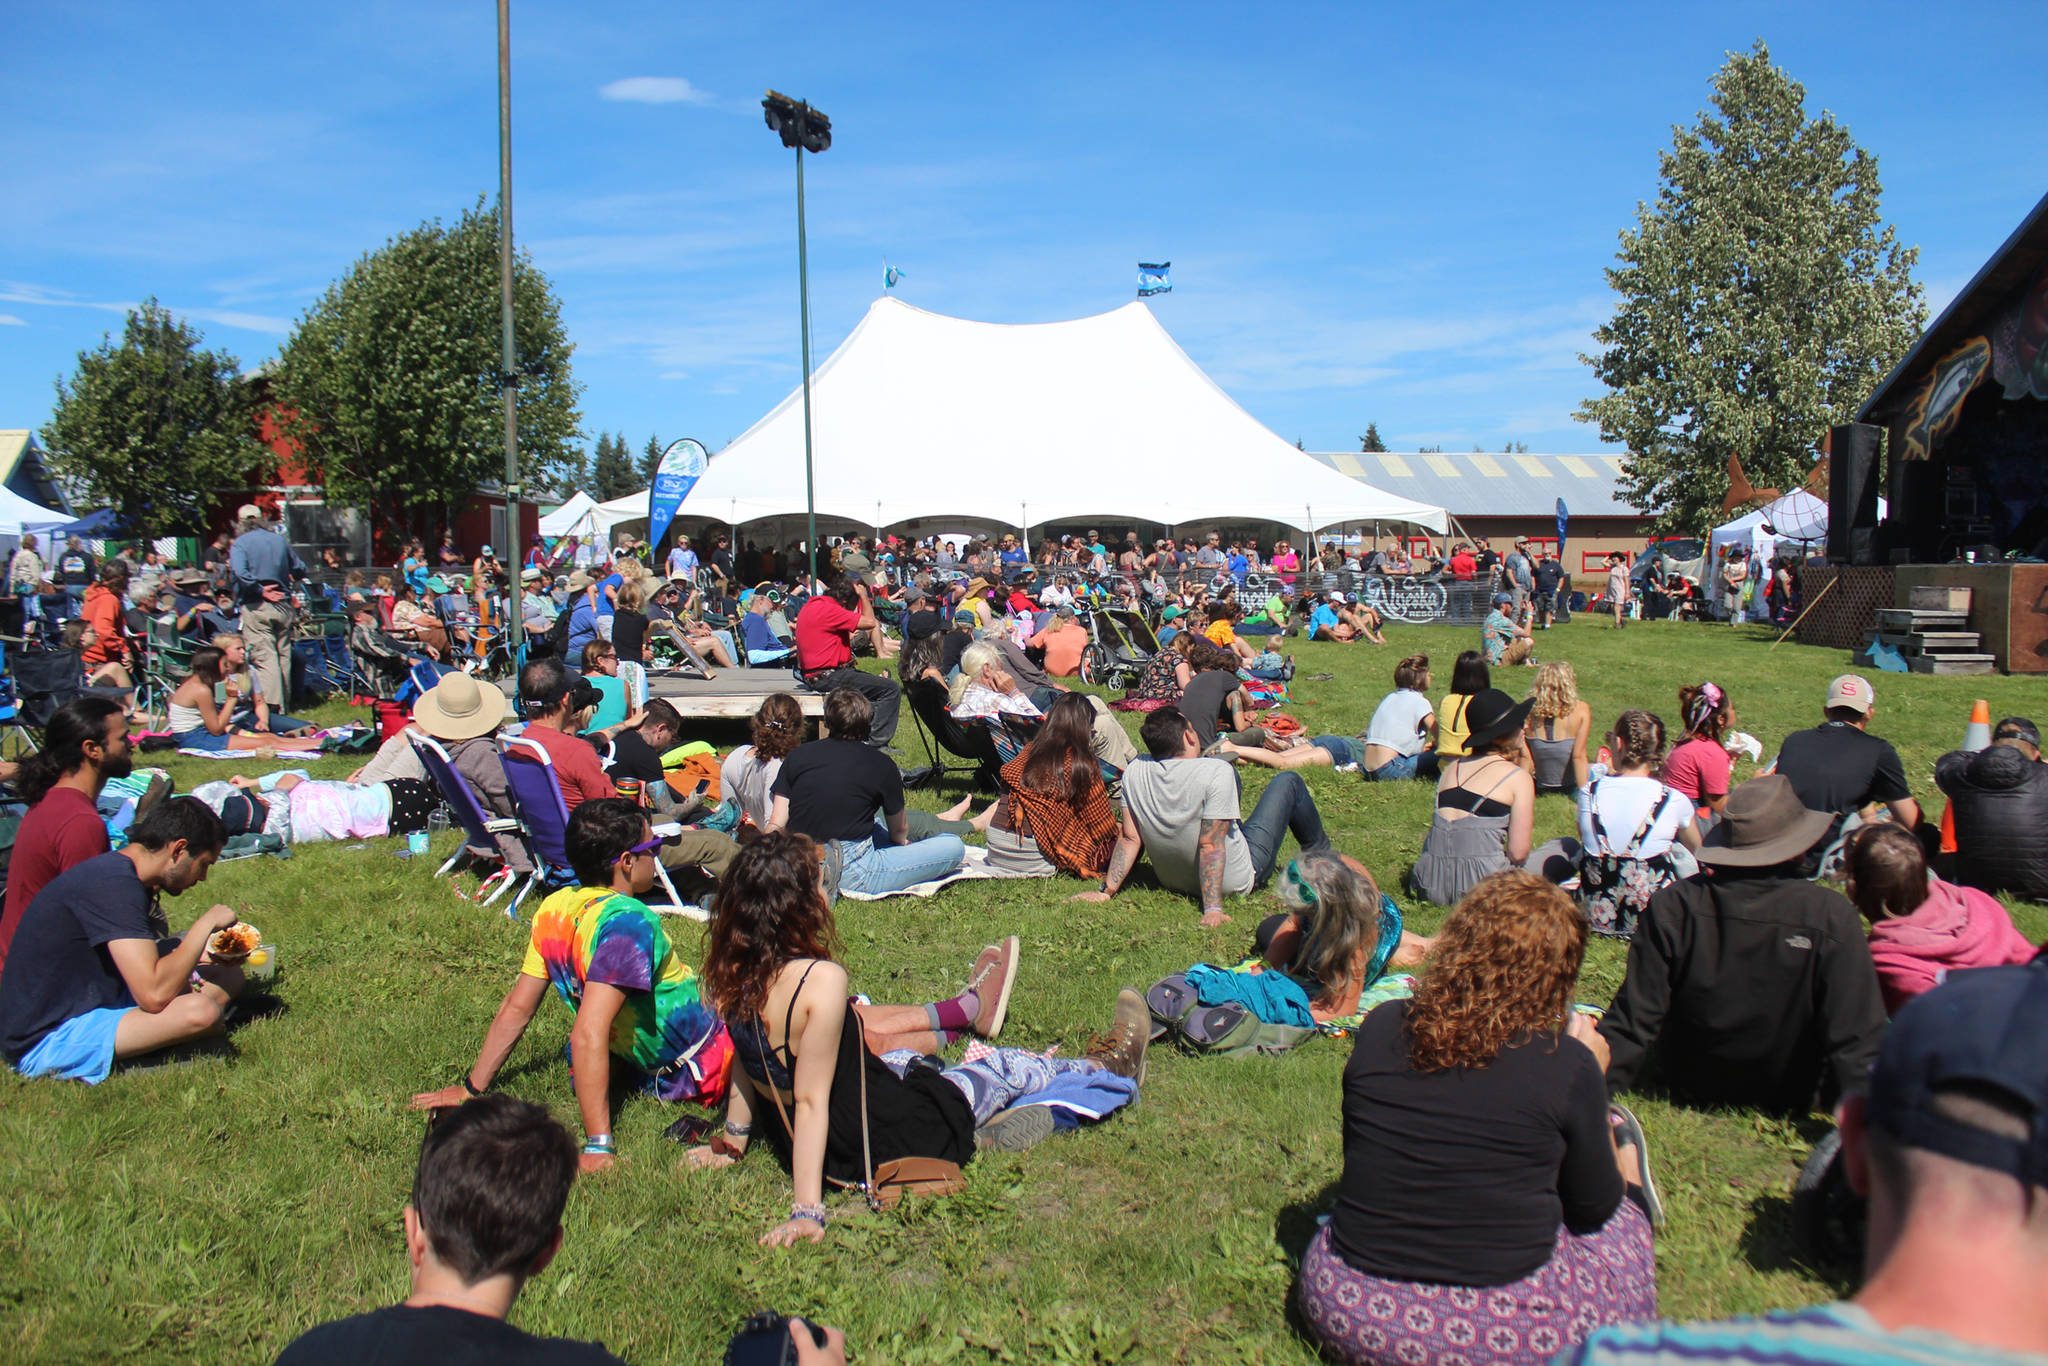 Spectators relax while listening to a musician at the Ocean Stage at Salmonfest on Friday, Aug. 2, 2019 in Ninilchik, Alaska. (Photo by Megan Pacer/Homer News)